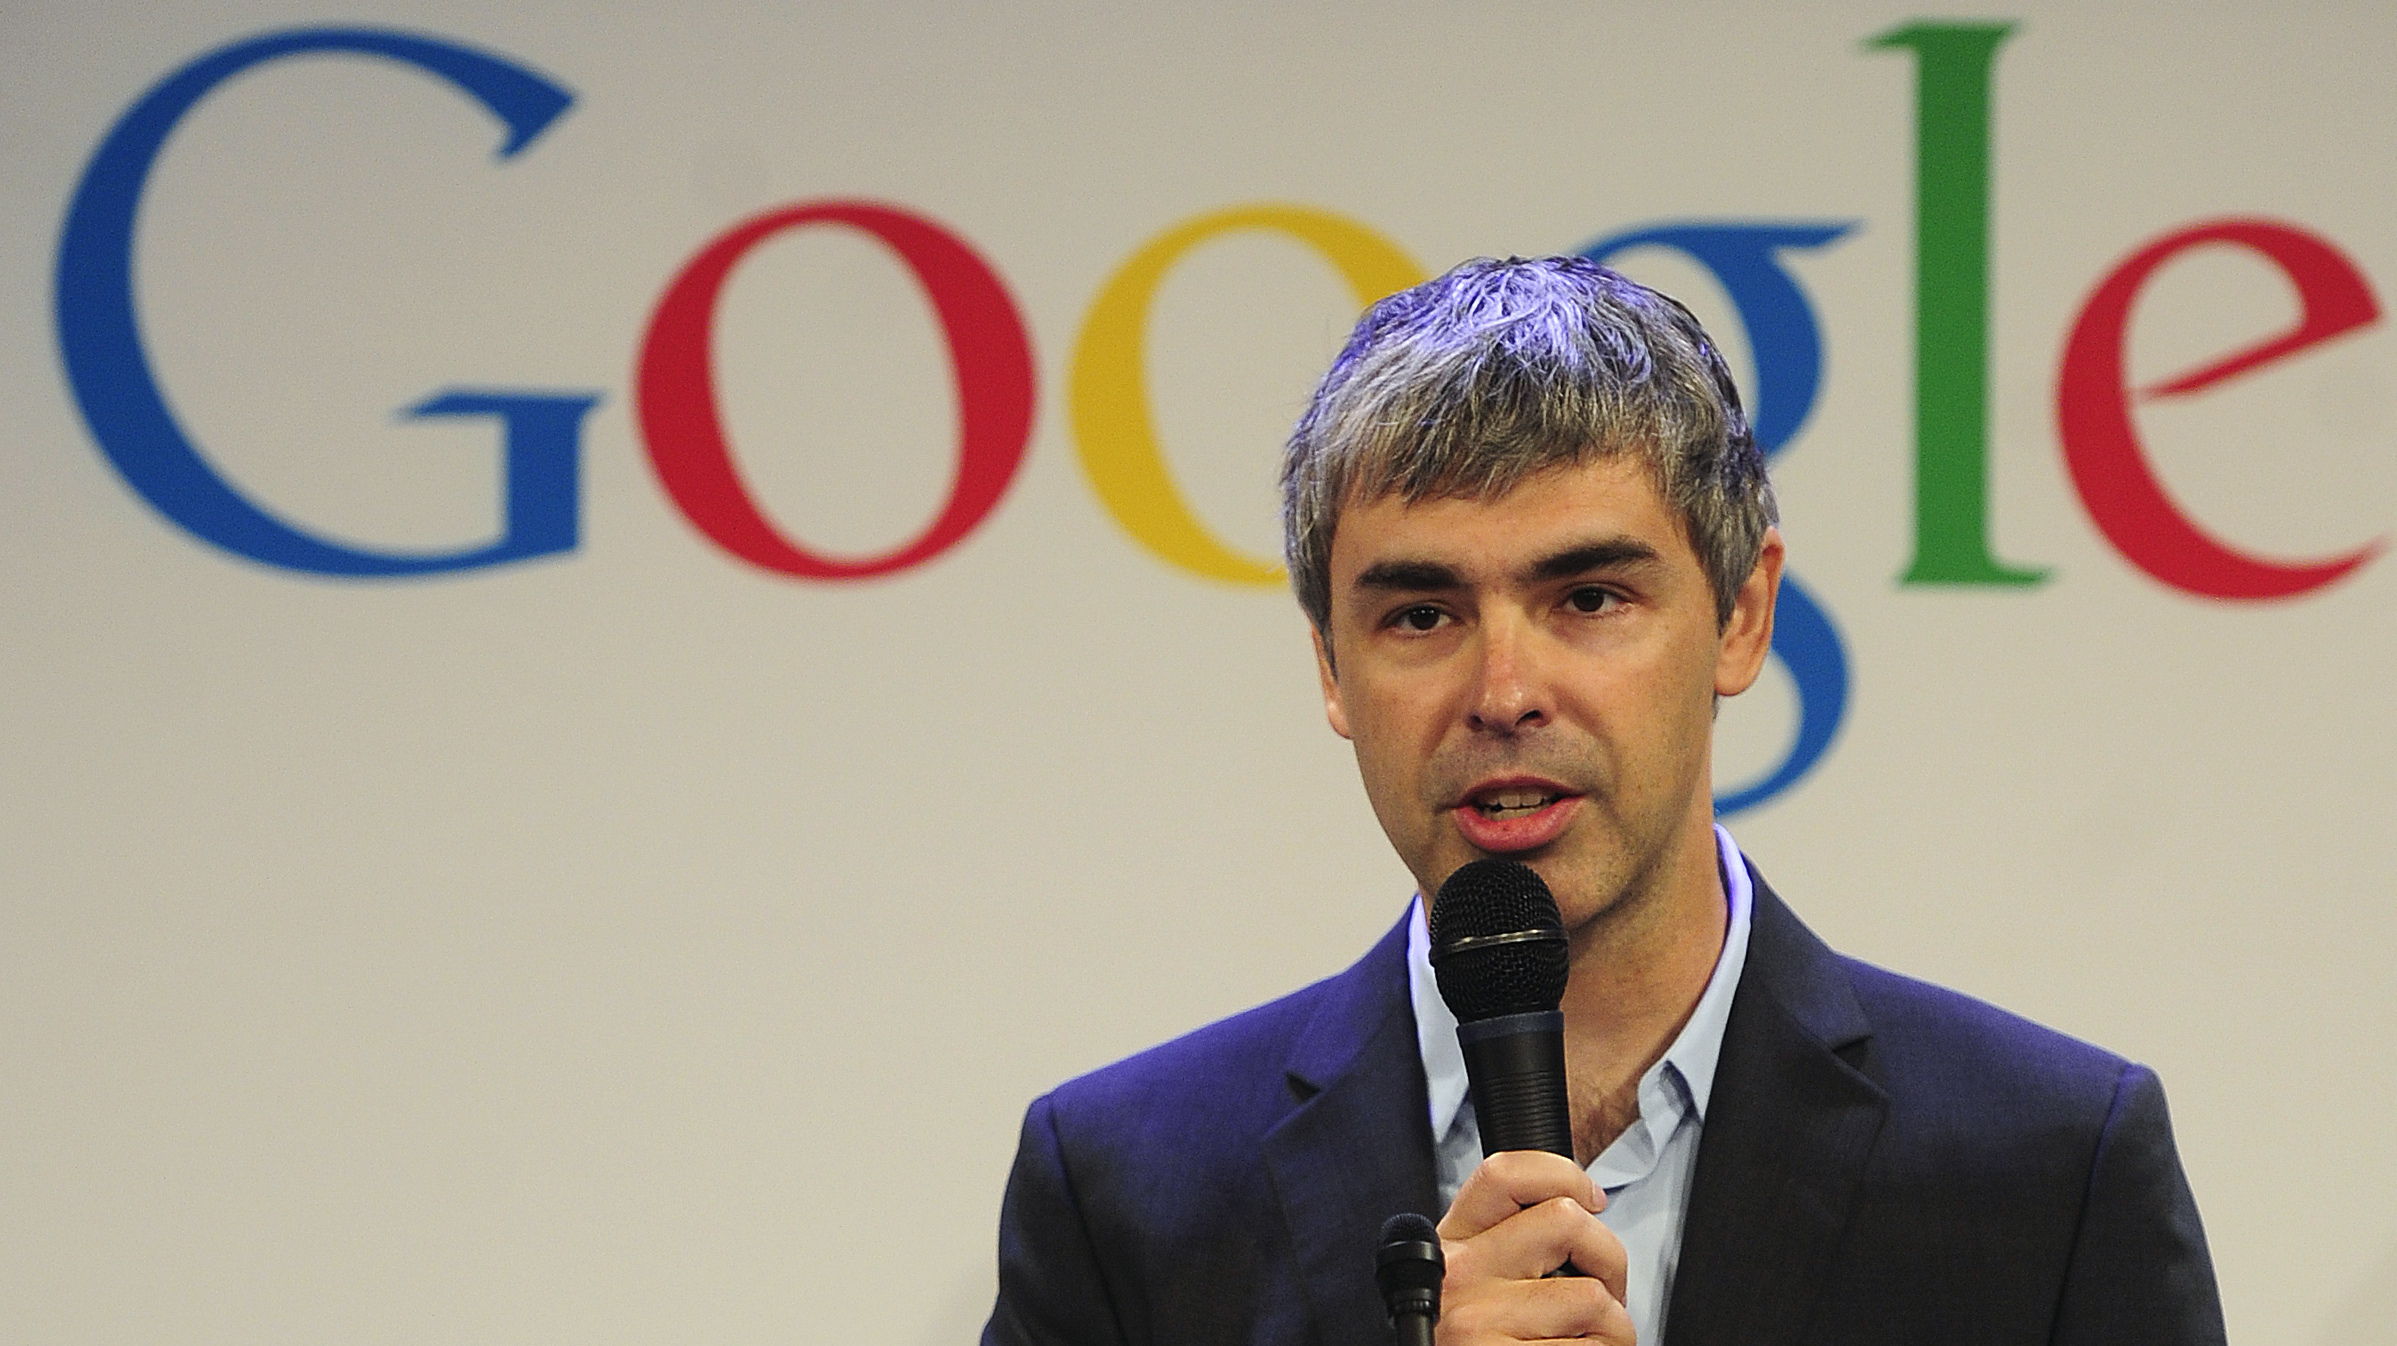 Larry Page Best CEO of 2012